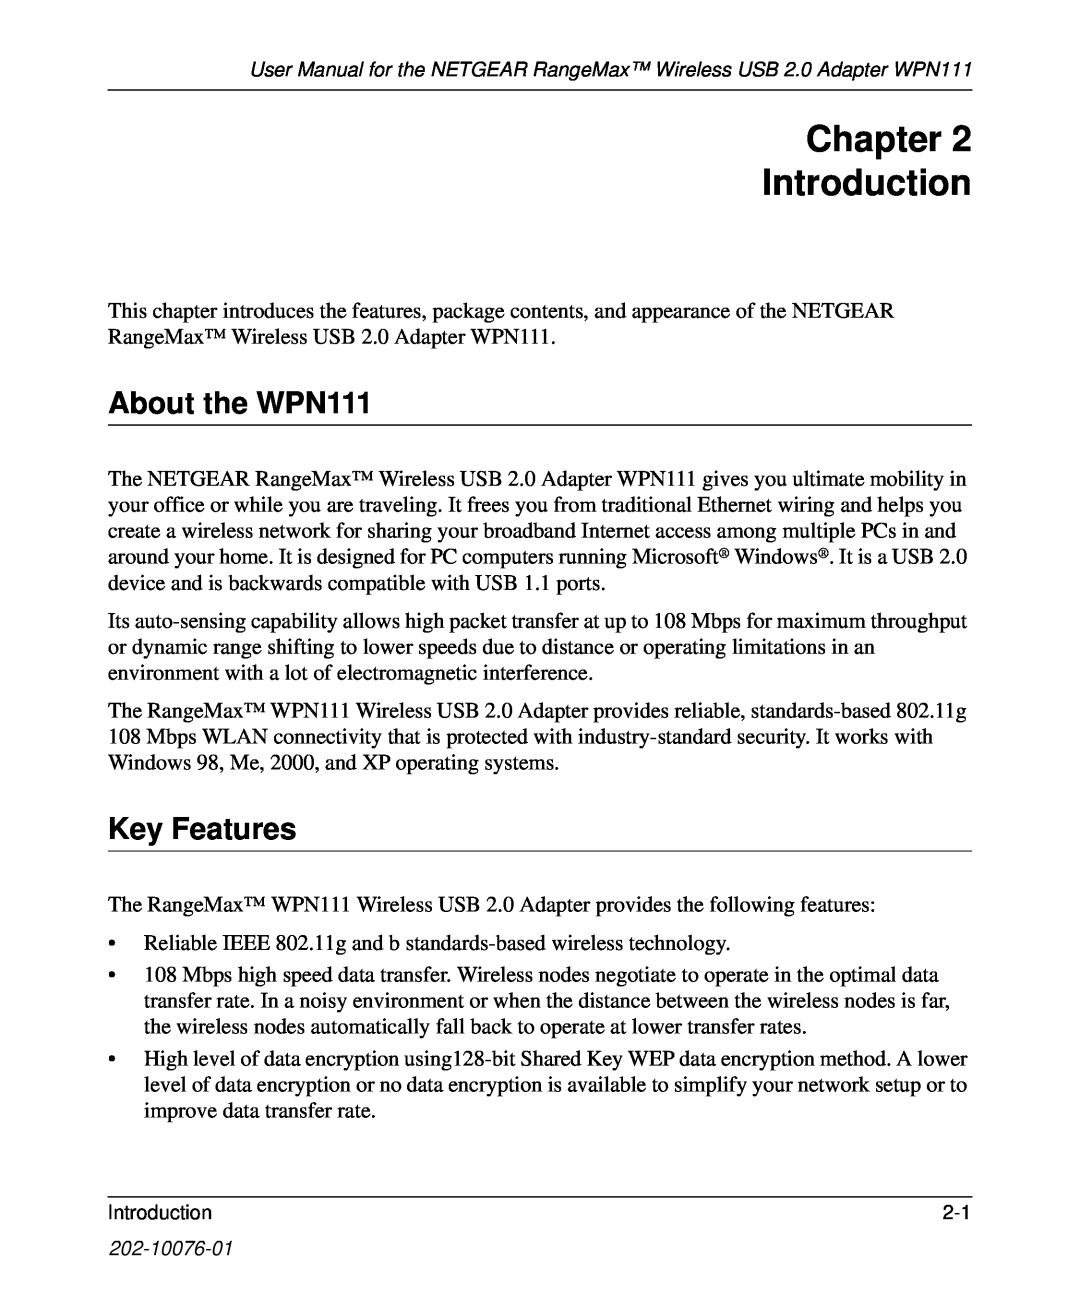 NETGEAR user manual Chapter Introduction, About the WPN111, Key Features 